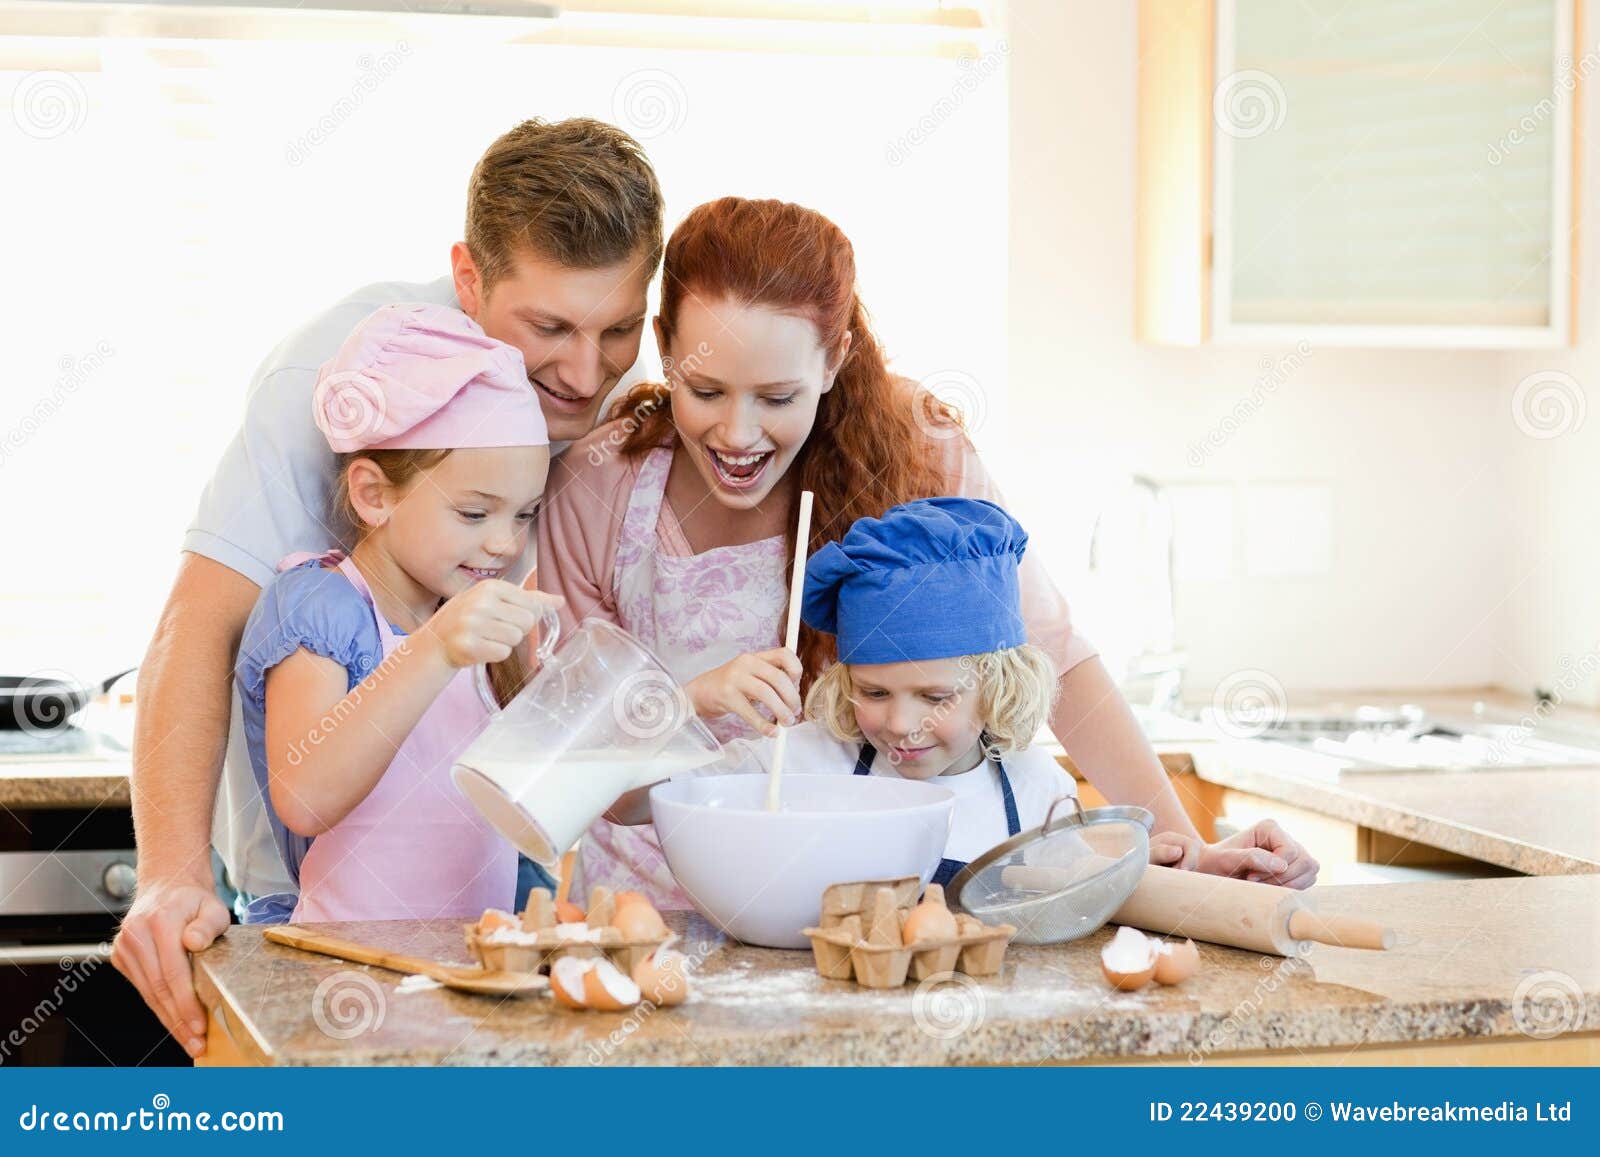 Family Having a Great Time Baking Together Stock Photo - Image of cake